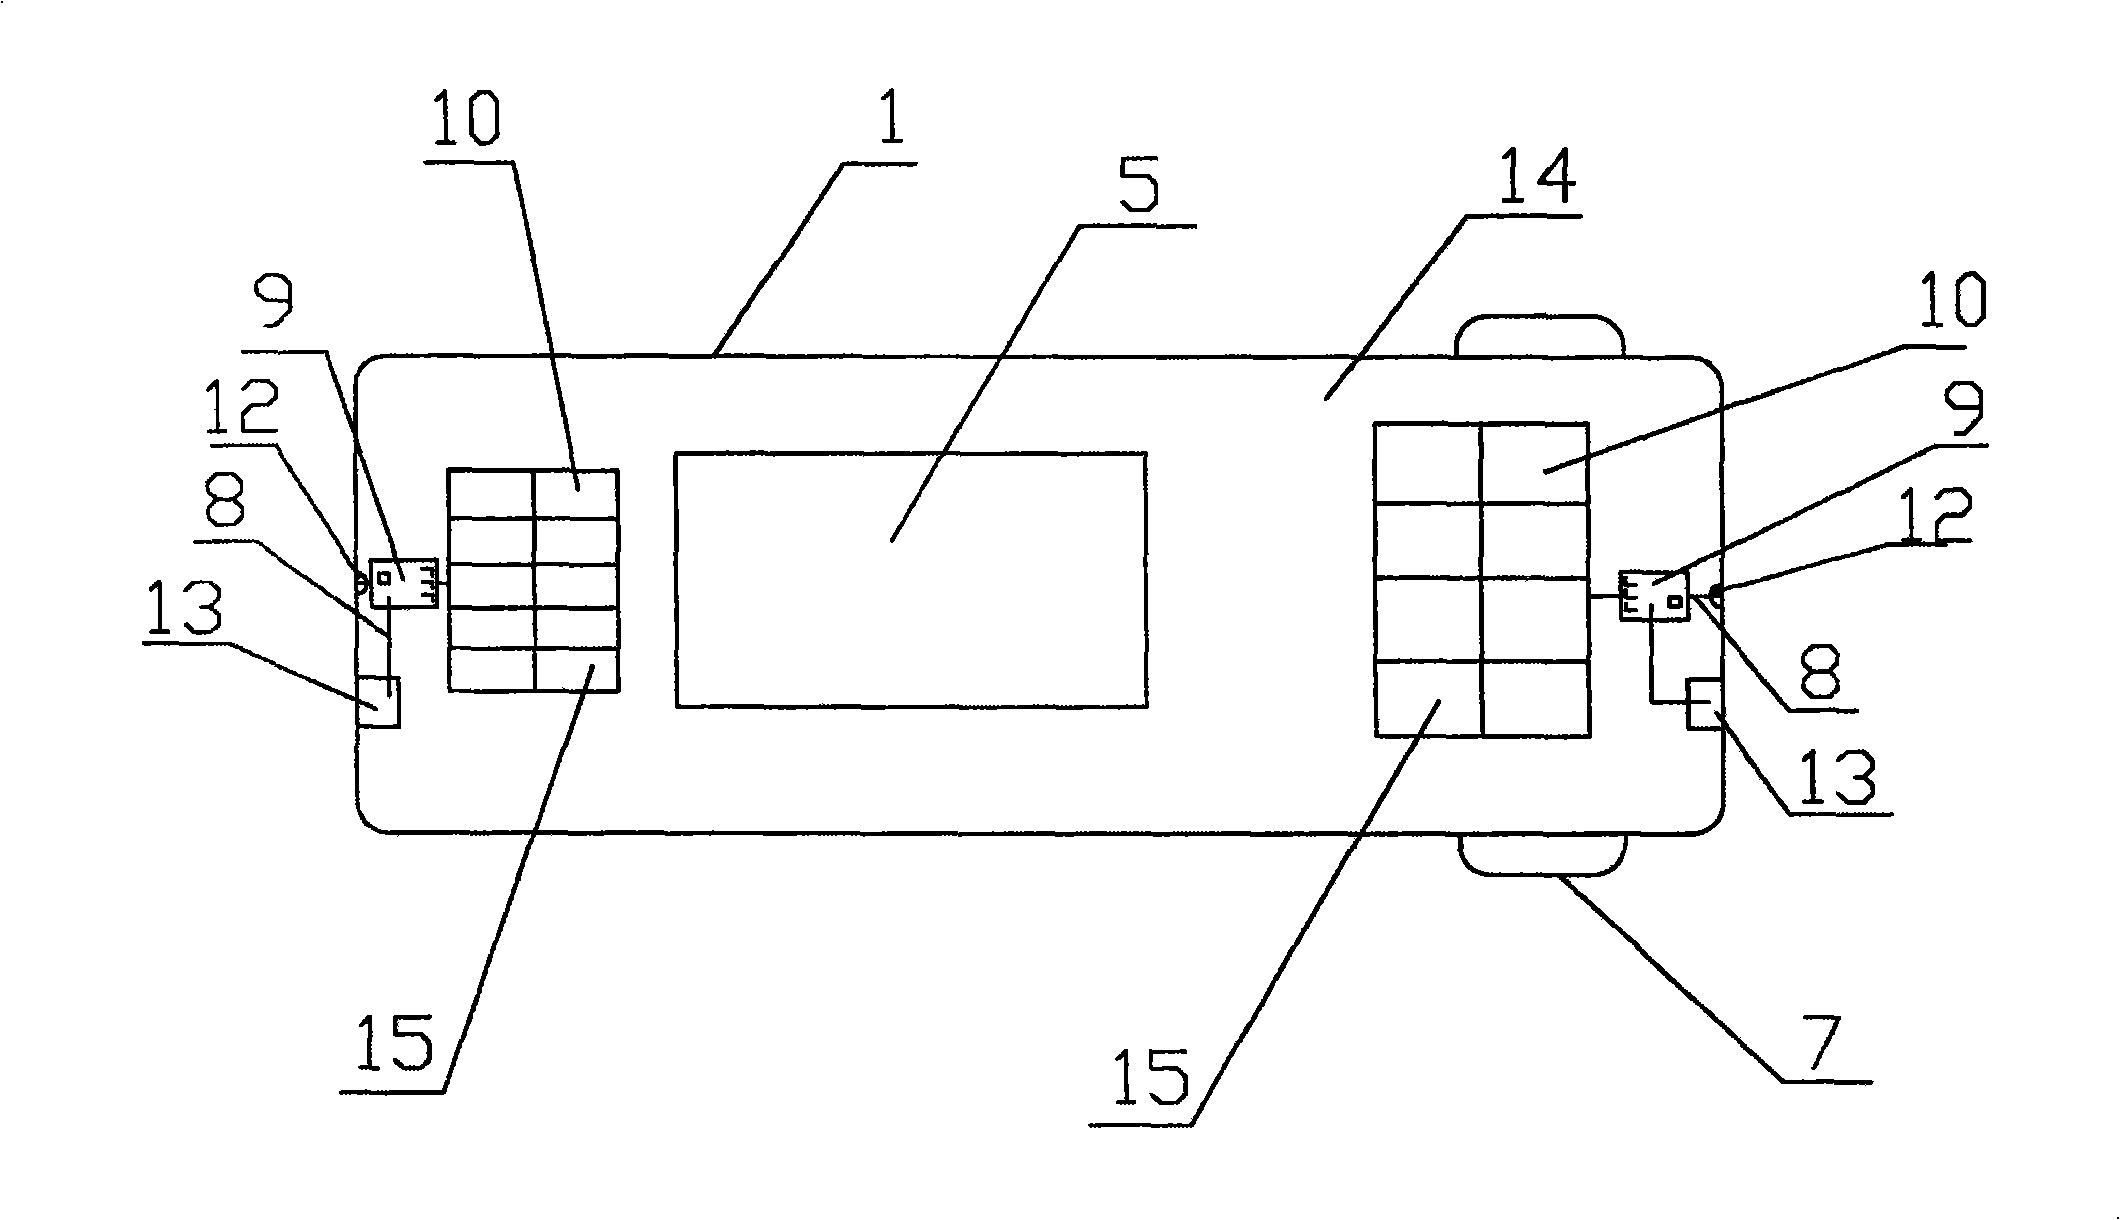 Lighting device of solar energy photovoltaic power generation system mounted on public transport vehicle